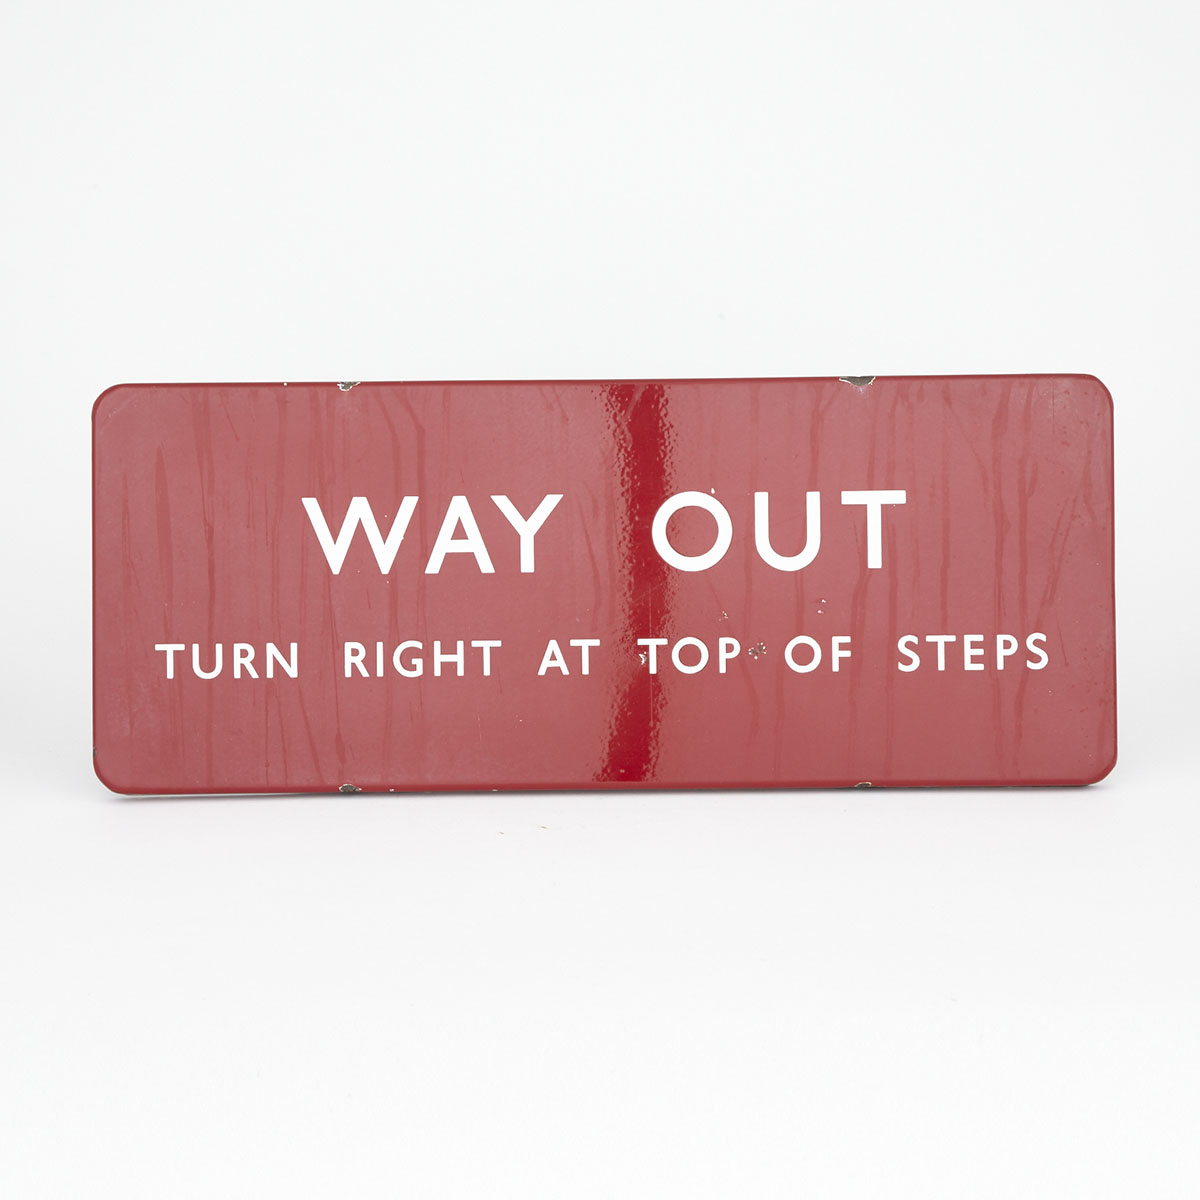 London Underground ‘Way Out’ Enamelled Metal Sign, mid 20th century